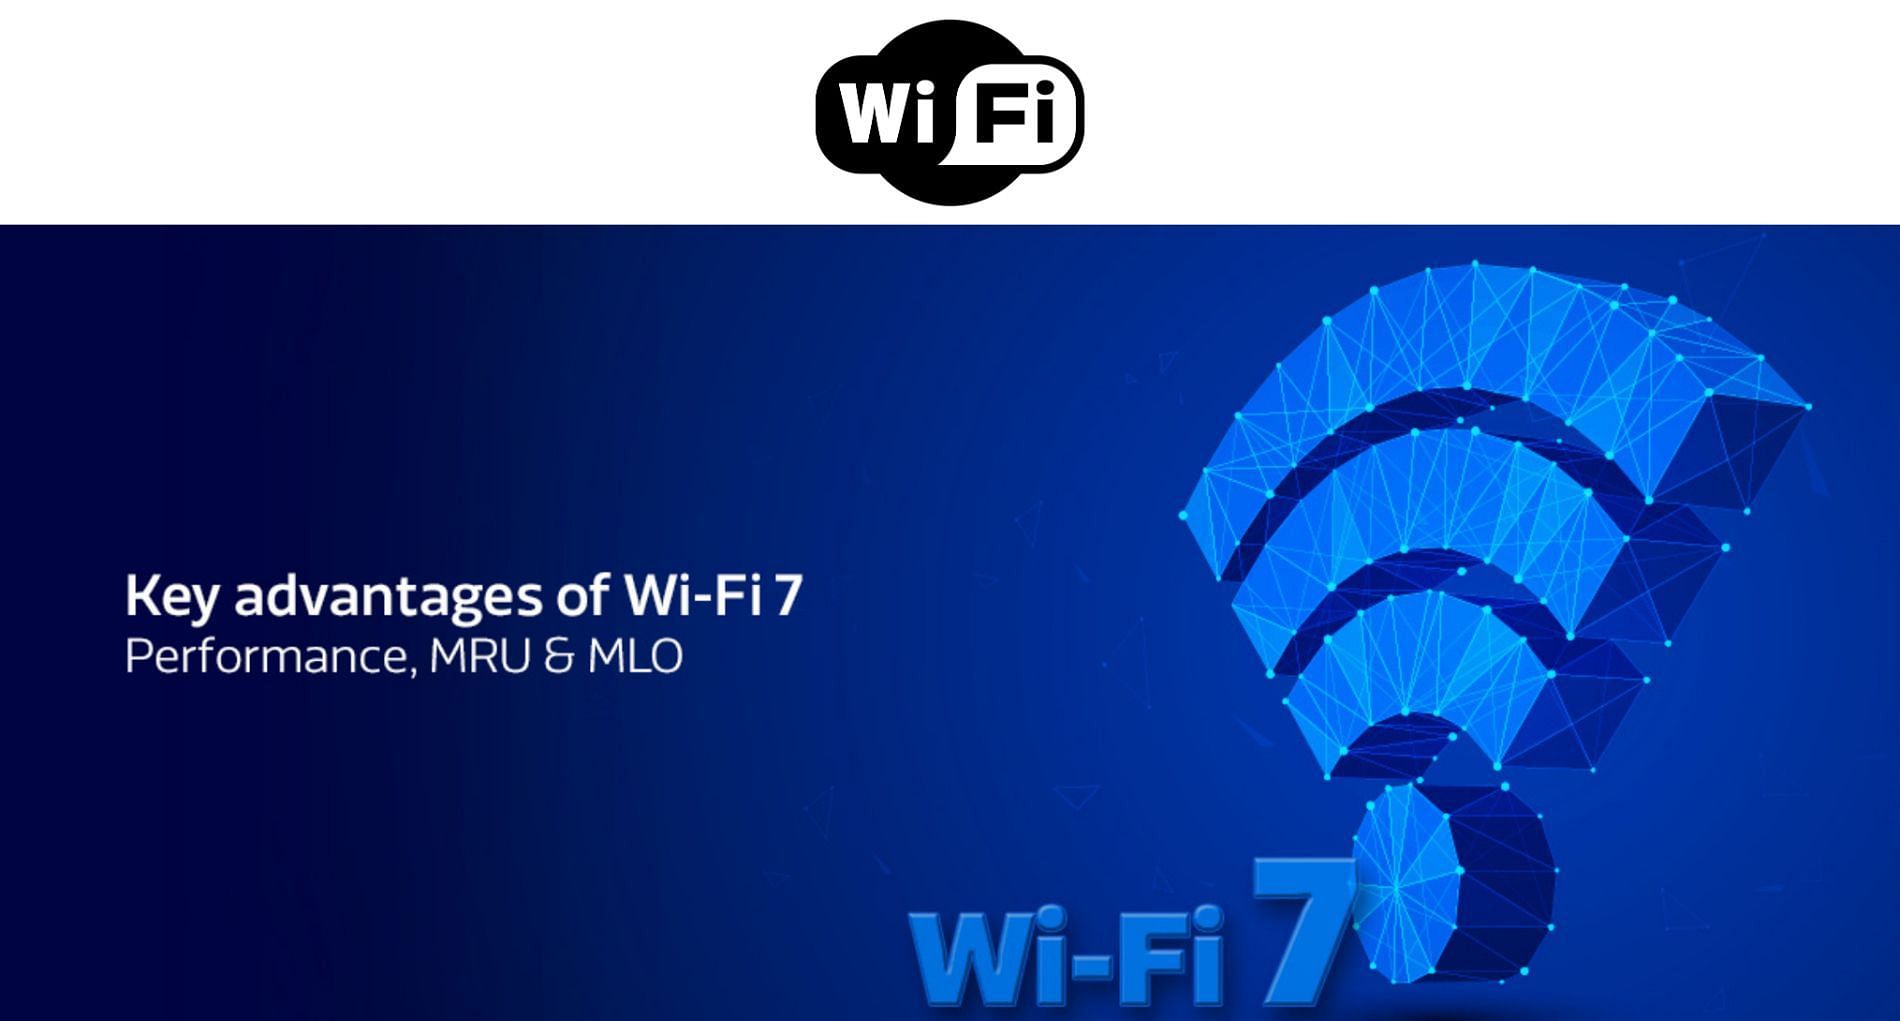 Getting a Jump on WiFi 7